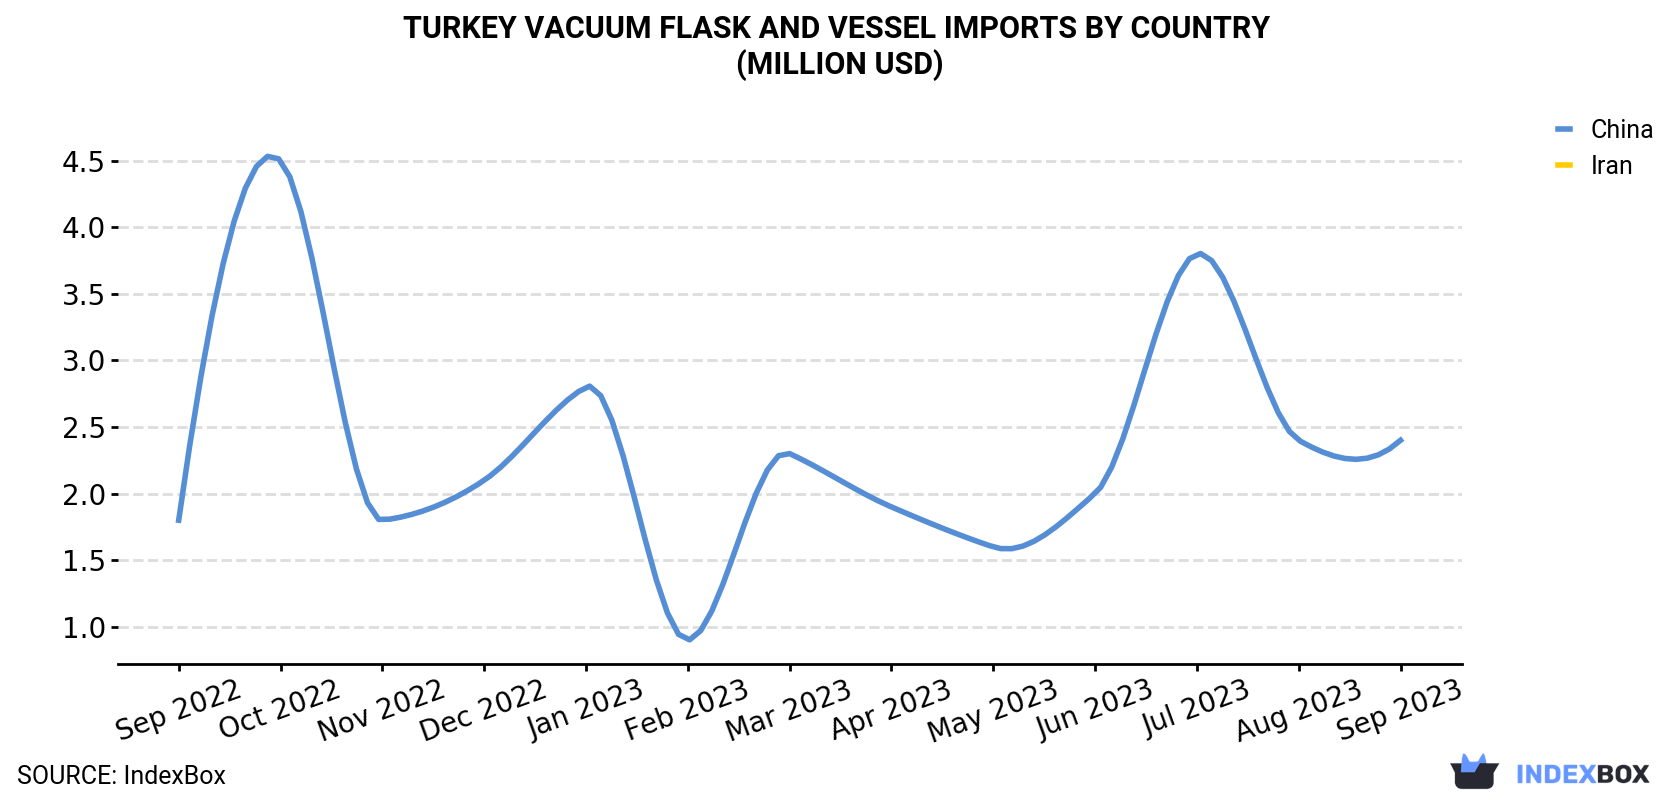 Turkey Vacuum Flask and Vessel Imports By Country (Million USD)